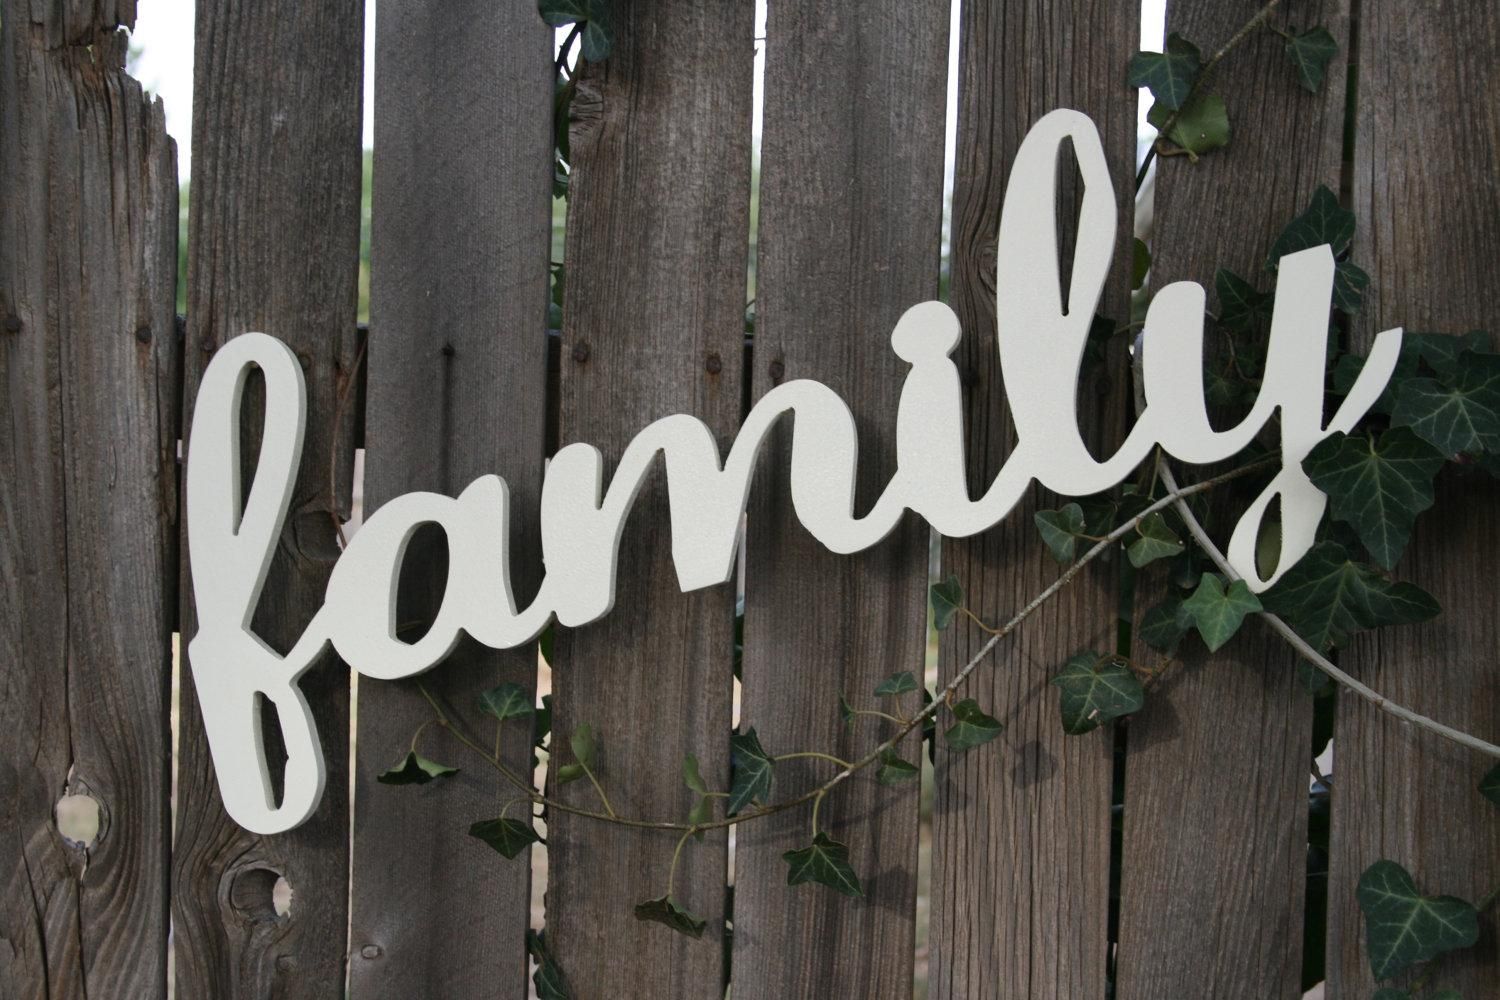 Word Wall Art Wood | Wallartideas In Wooden Word Art For Walls (View 15 of 20)